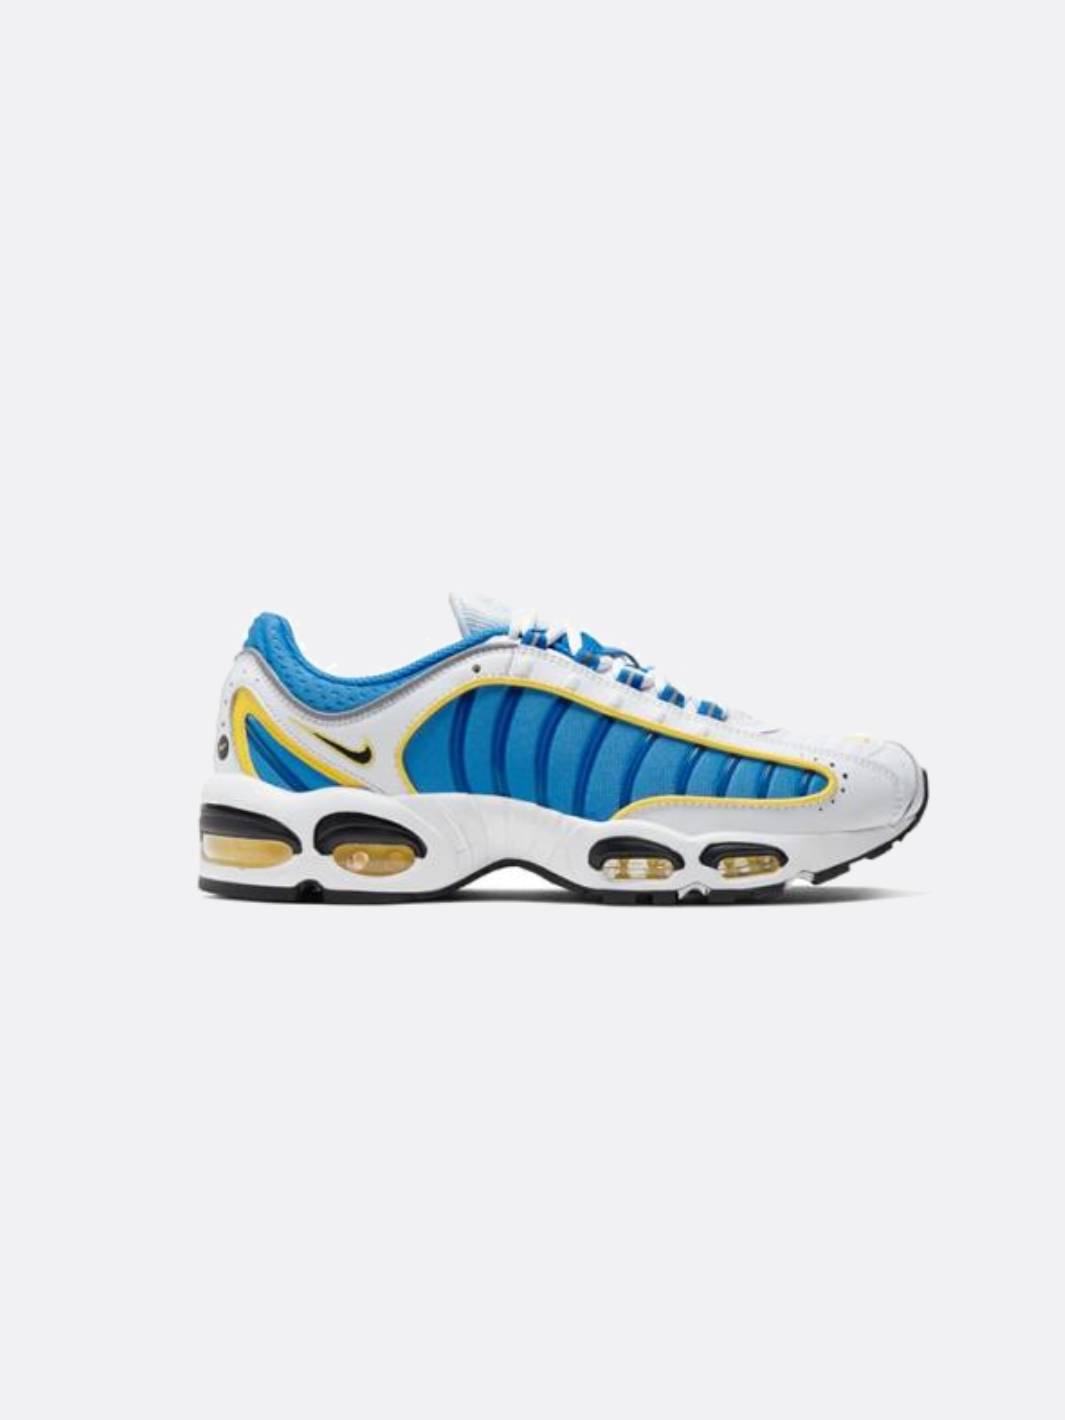 Air Max Tailwind IV - Nohble